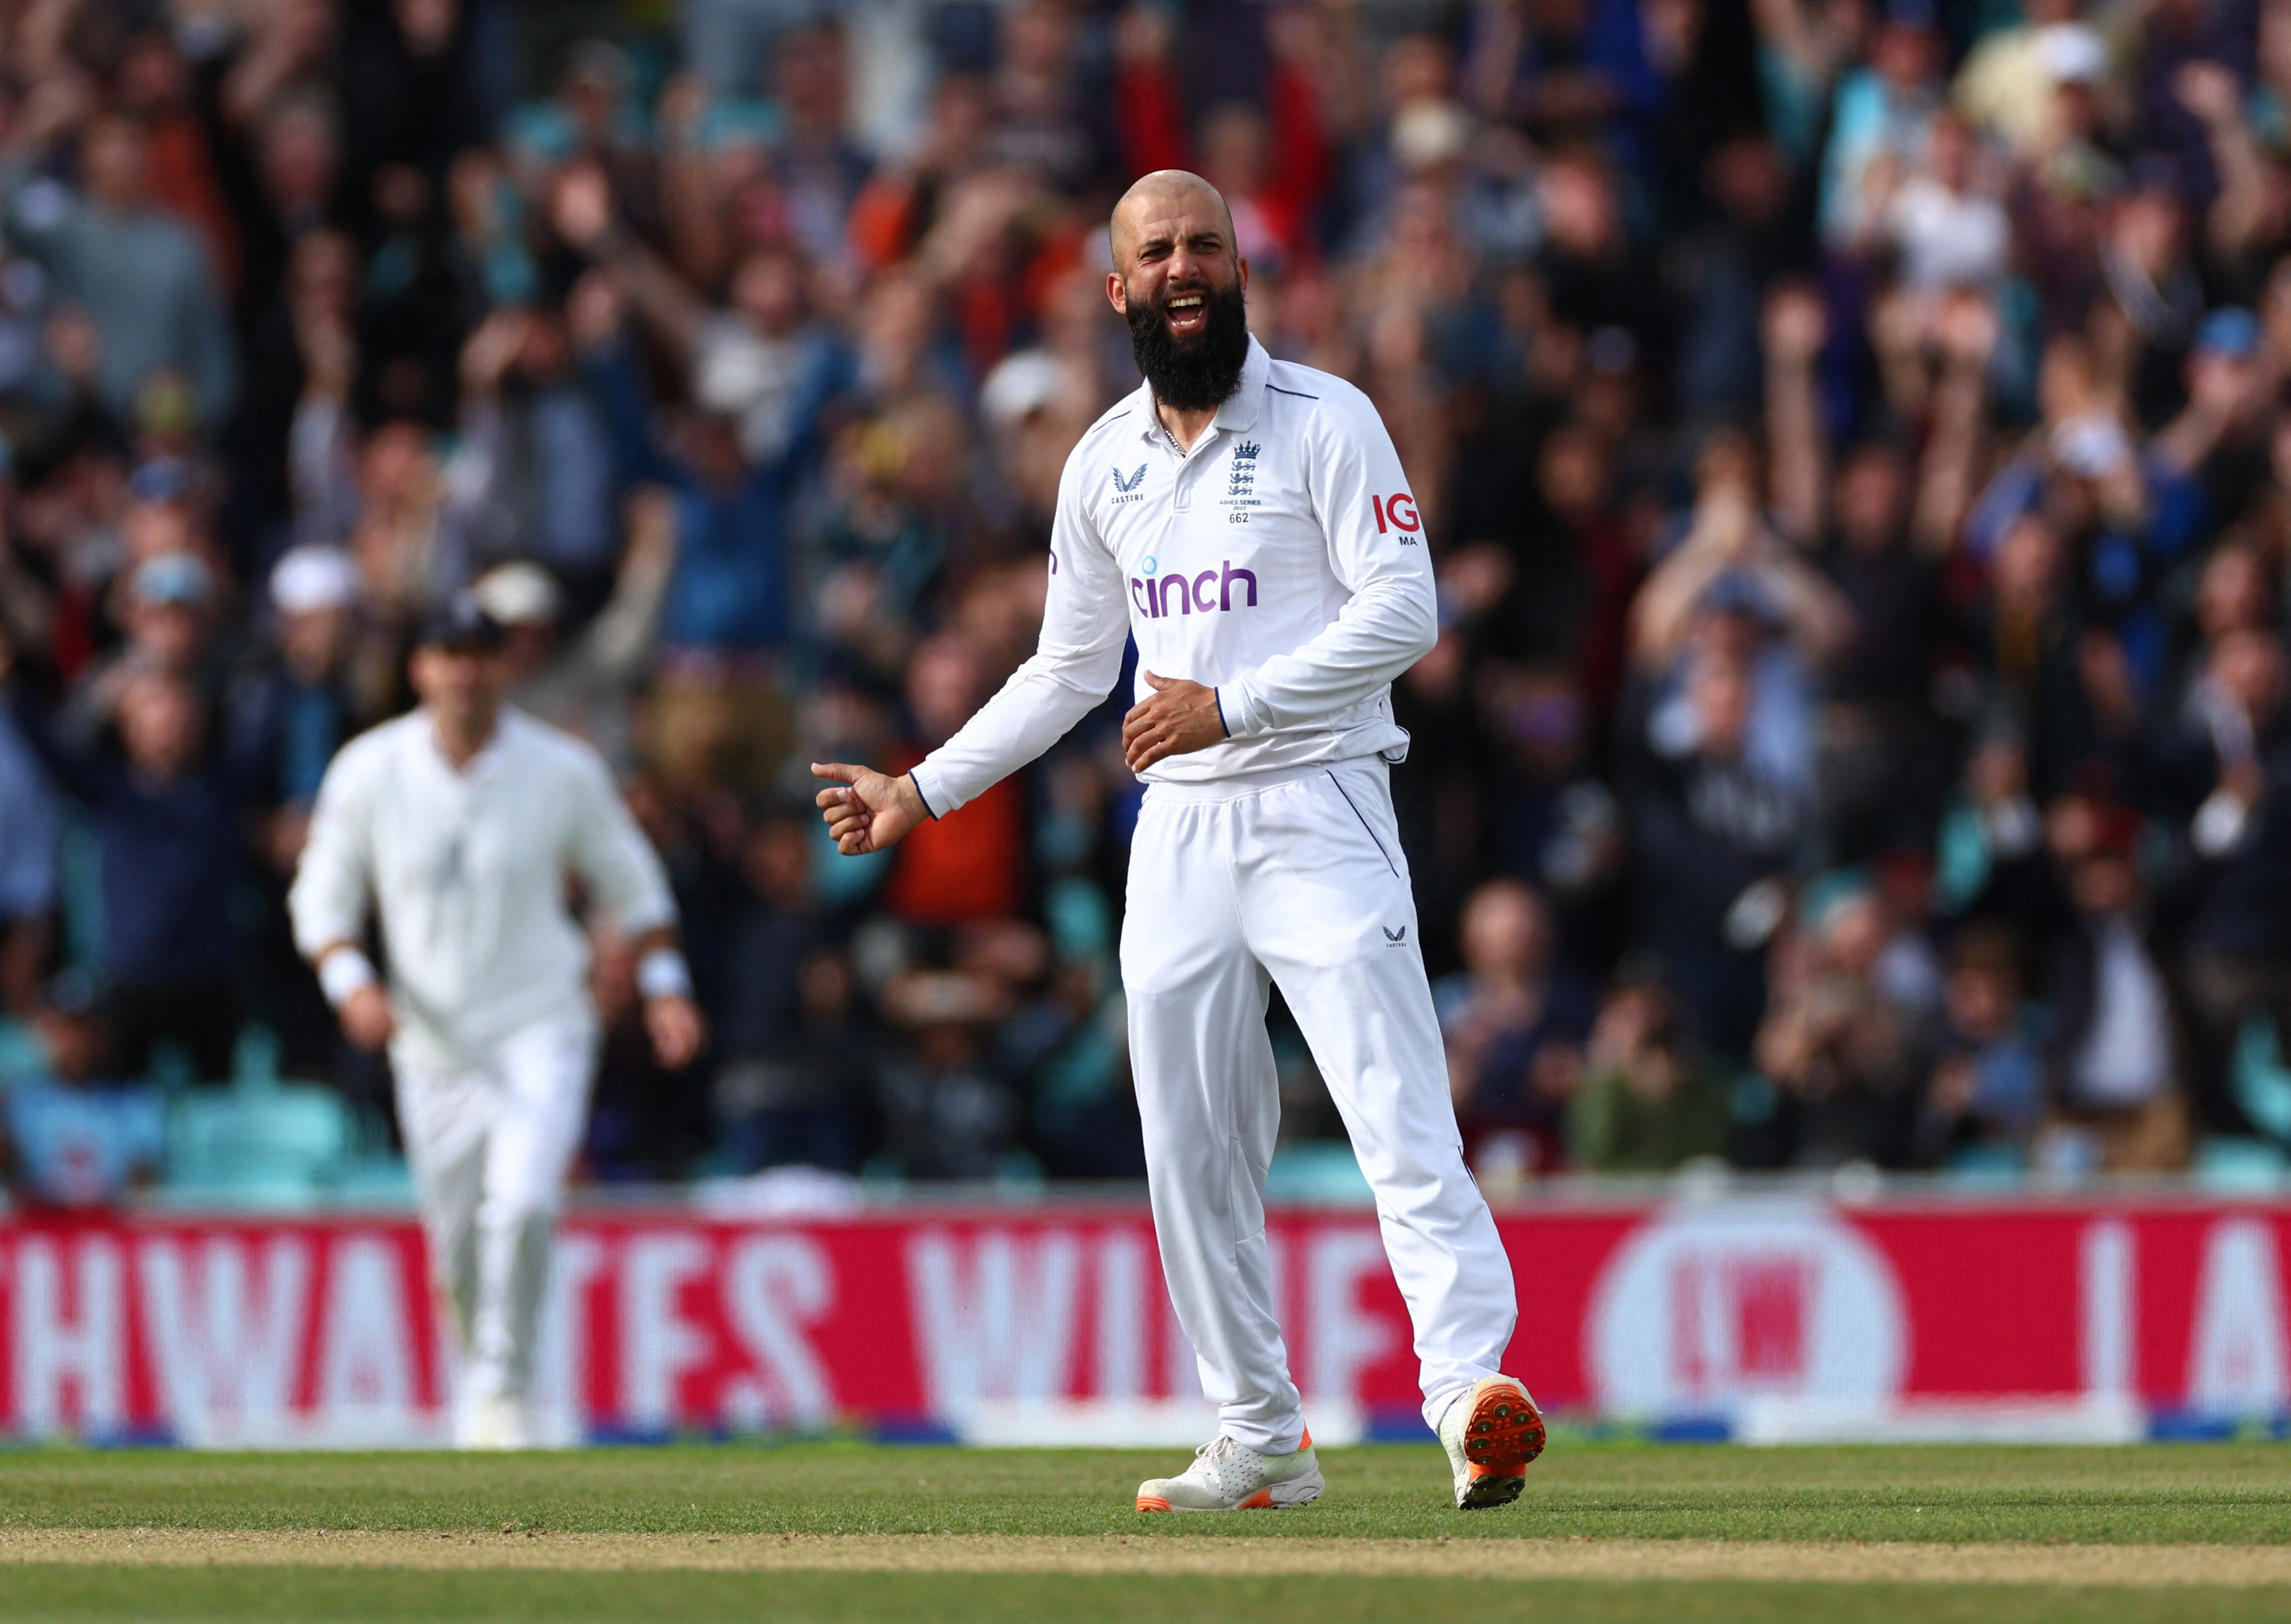 England’s Moeen Ali celebrates after taking the wicket of Australia’s Mitchell Marsh